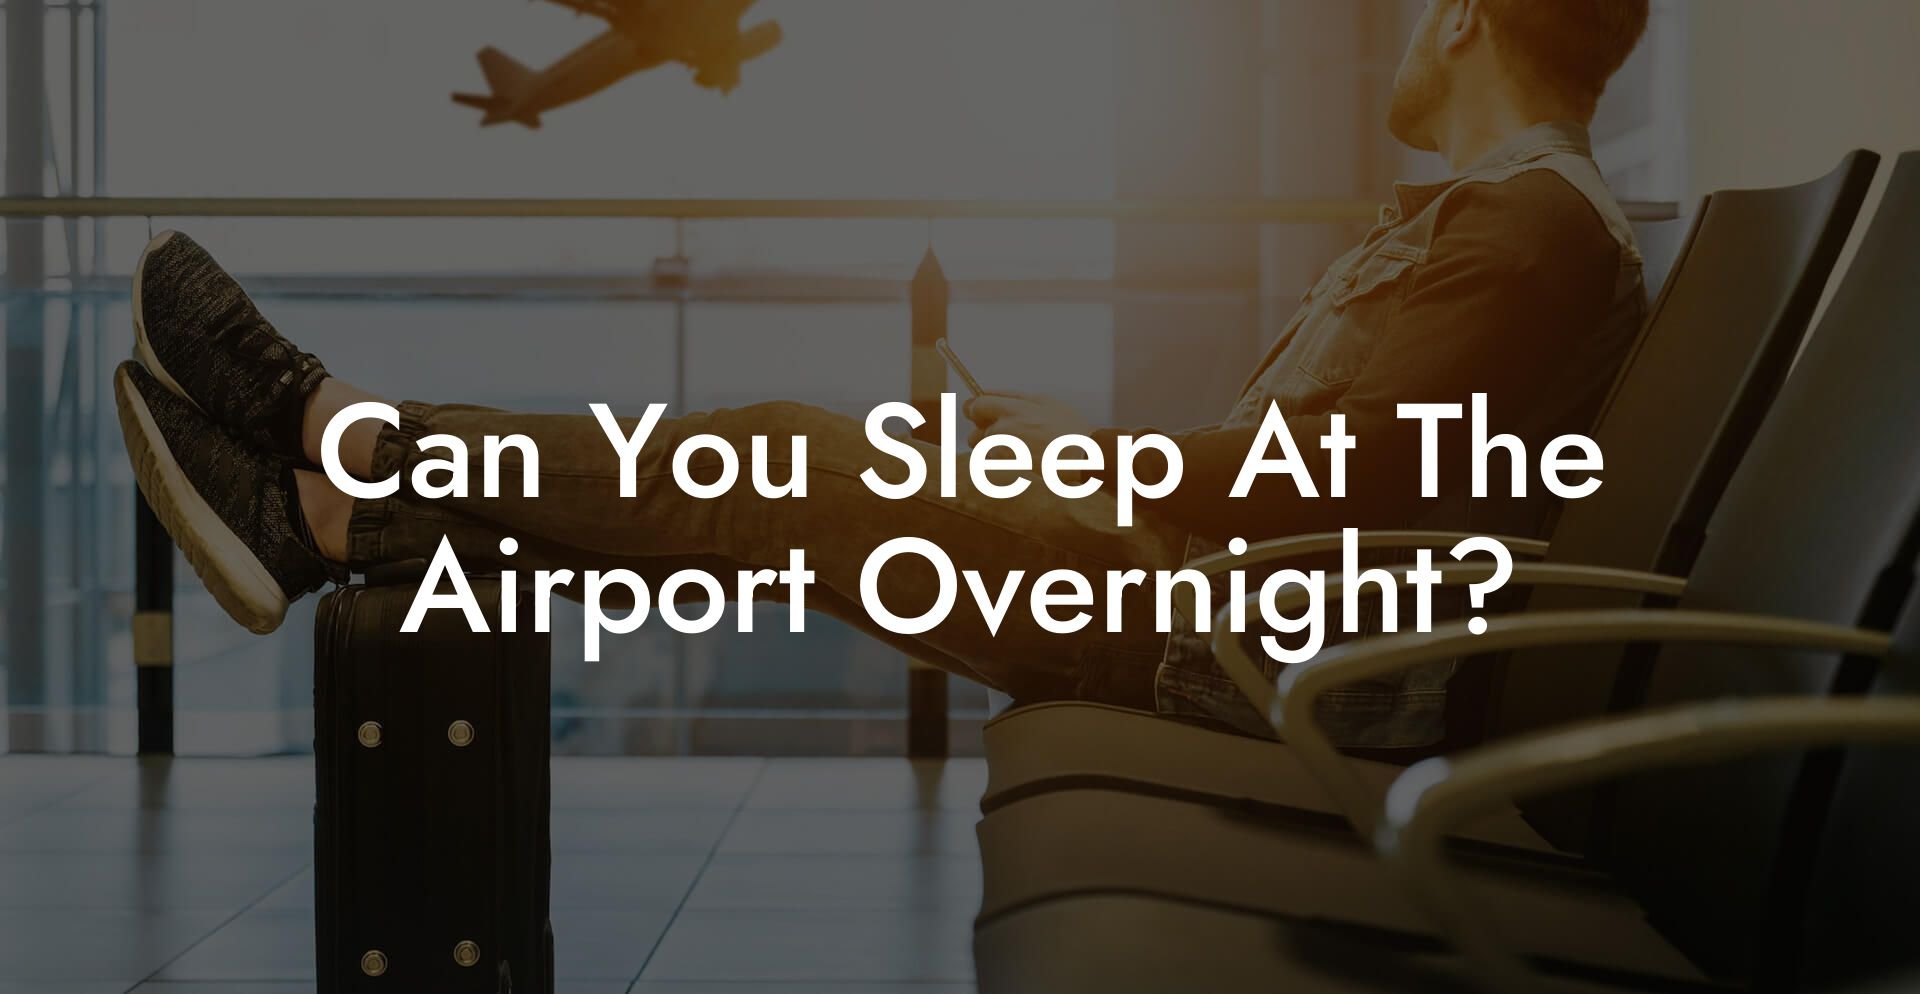 Can You Sleep At The Airport Overnight?